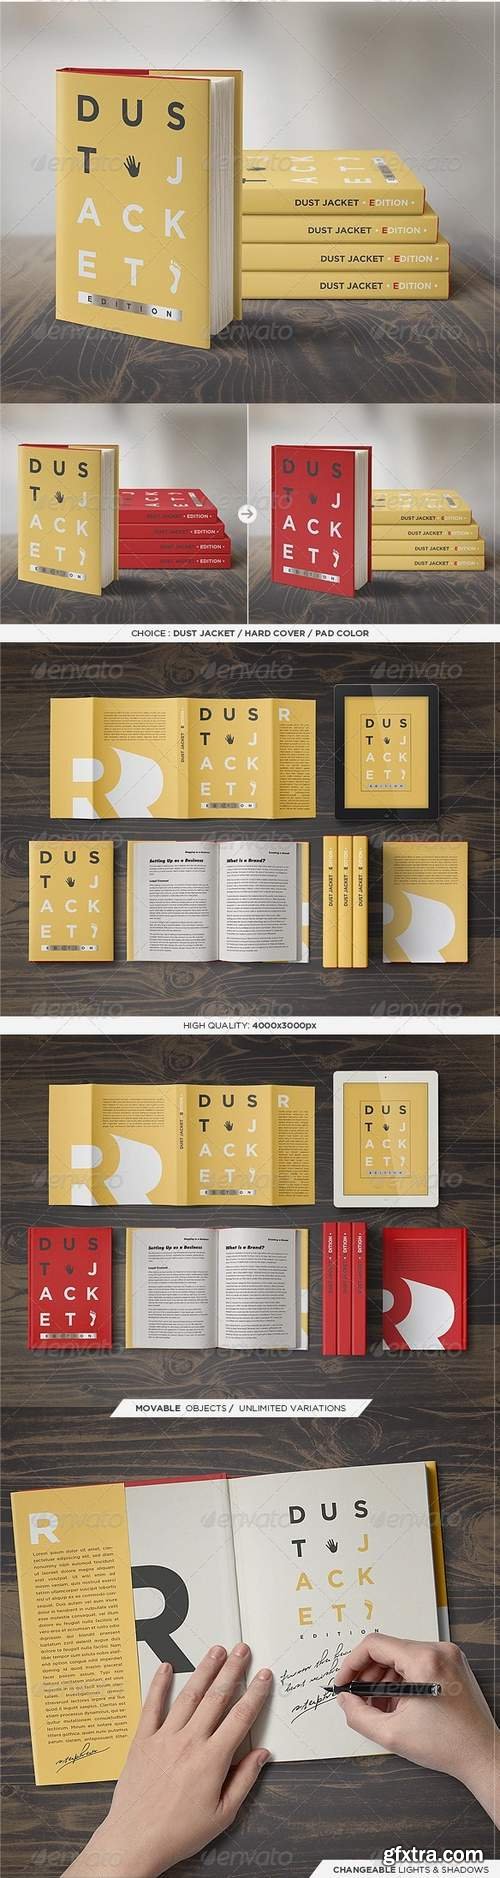 Book Mock-Up - Dust Jacket Edition - GraphicRiver 7735188